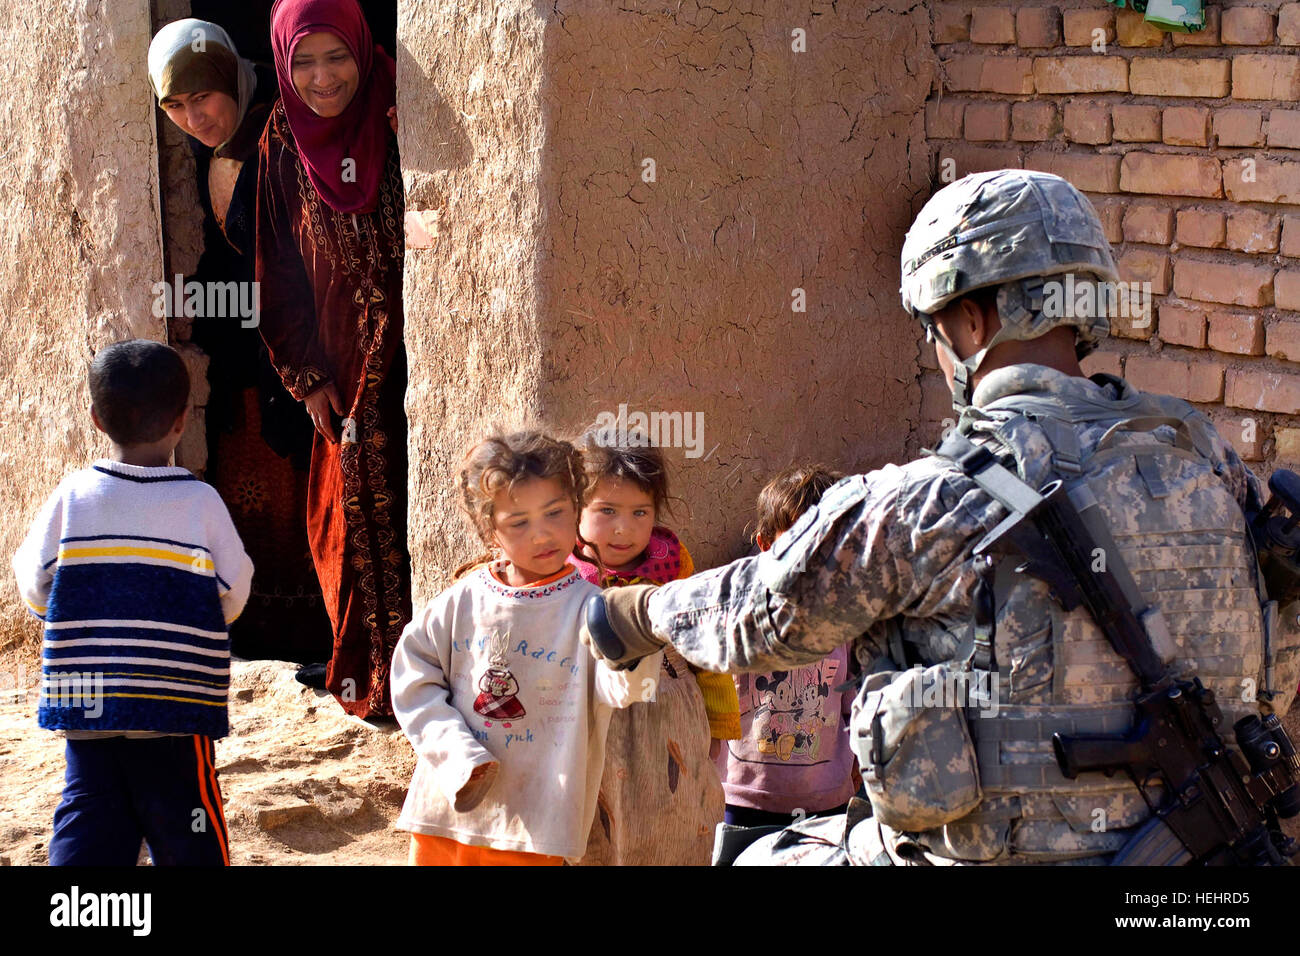 Iraqi children receive candy from U.S. Army Sgt. Anthony Woods from 1st Battalion, 2nd Infantry Regiment attached to 3rd Battalion, 66th Armor Regiment, 1st Stryker Brigade Combat Team, 25th Infantry Division, during the clearing of the village of Tammuz, in Diyala Province, Iraq, on March 2, 2009. (U.S. Navy photo by Mass Communication Specialist 2nd Class Walter J. Pels/Released) Flickr - The U.S. Army - Tammuza Treats Stock Photo